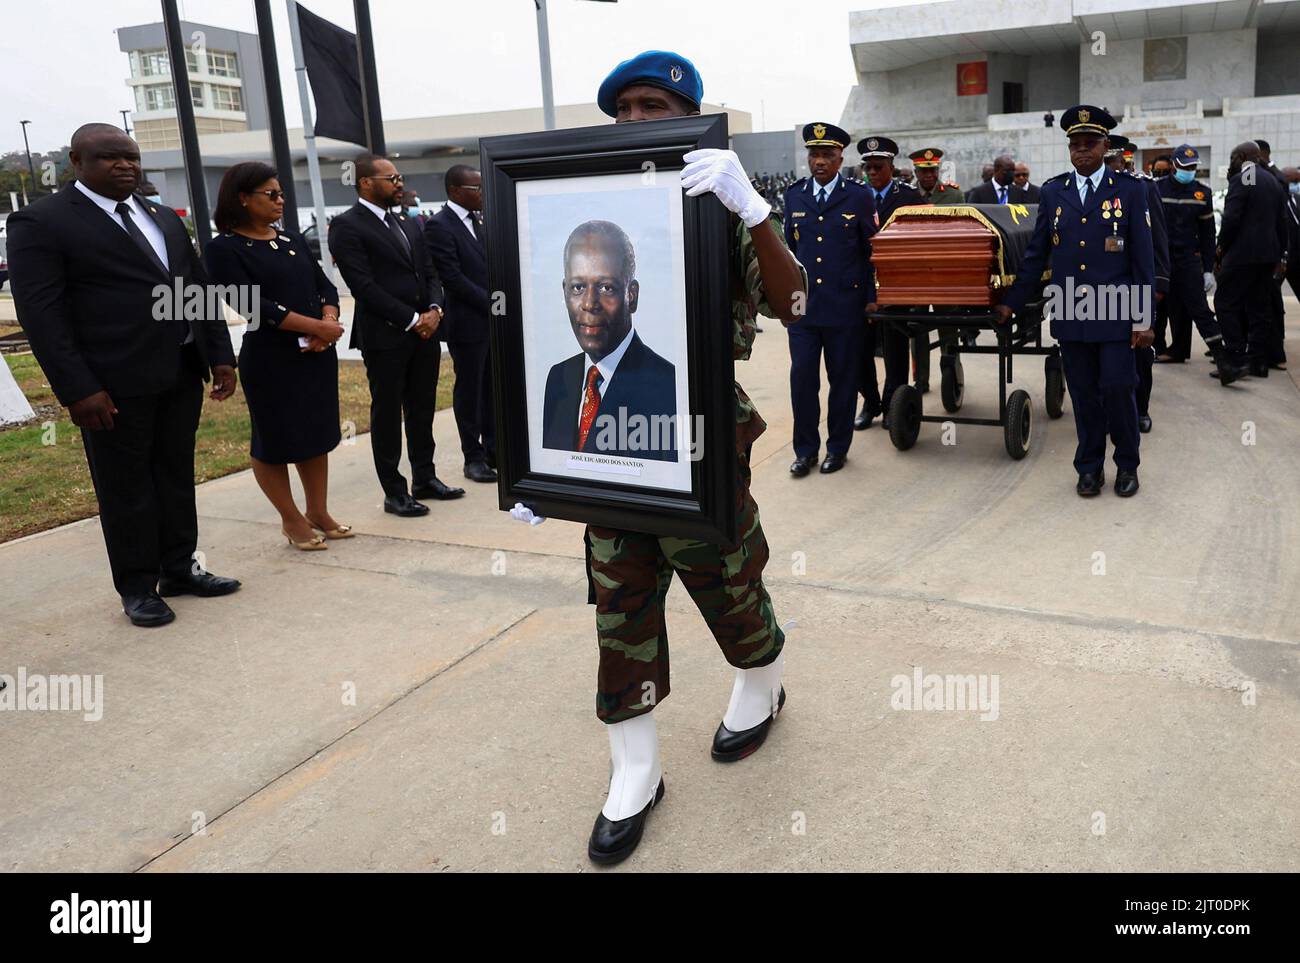 A member of the military holds a portrait as a casket carrying the body of Angola's former President Jose Eduardo dos Santos, who died in Spain in July, arrives at the Agostinho Neto Memorial in Luanda, August 27, 2022. REUTERS/Siphiwe Sibeko Stock Photo